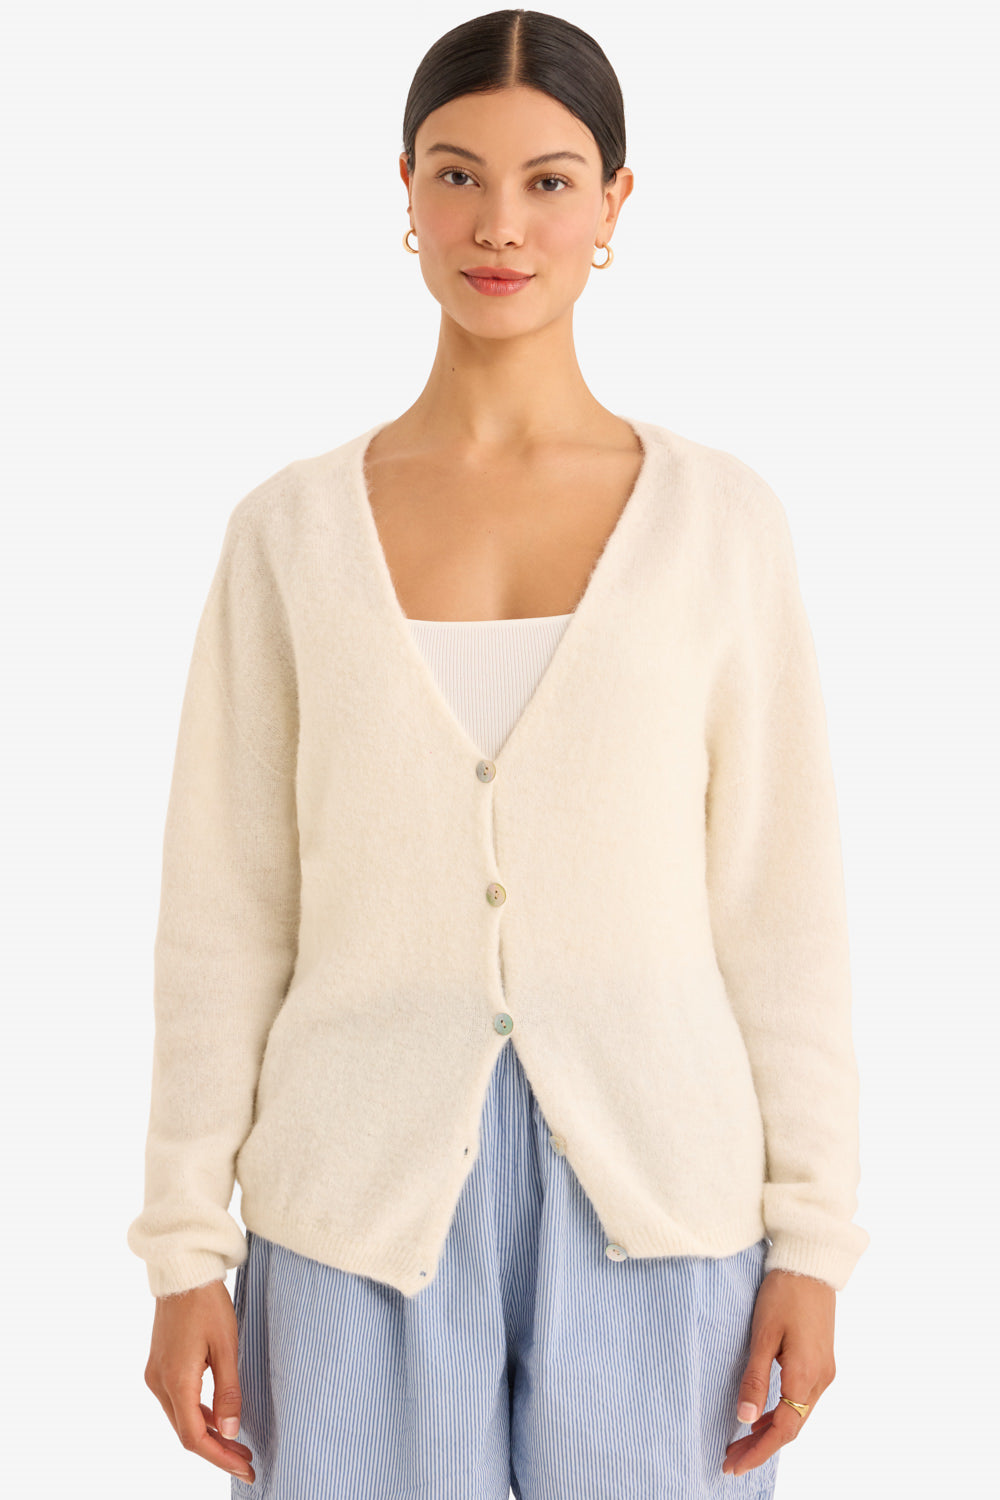 The Colette Cardigan